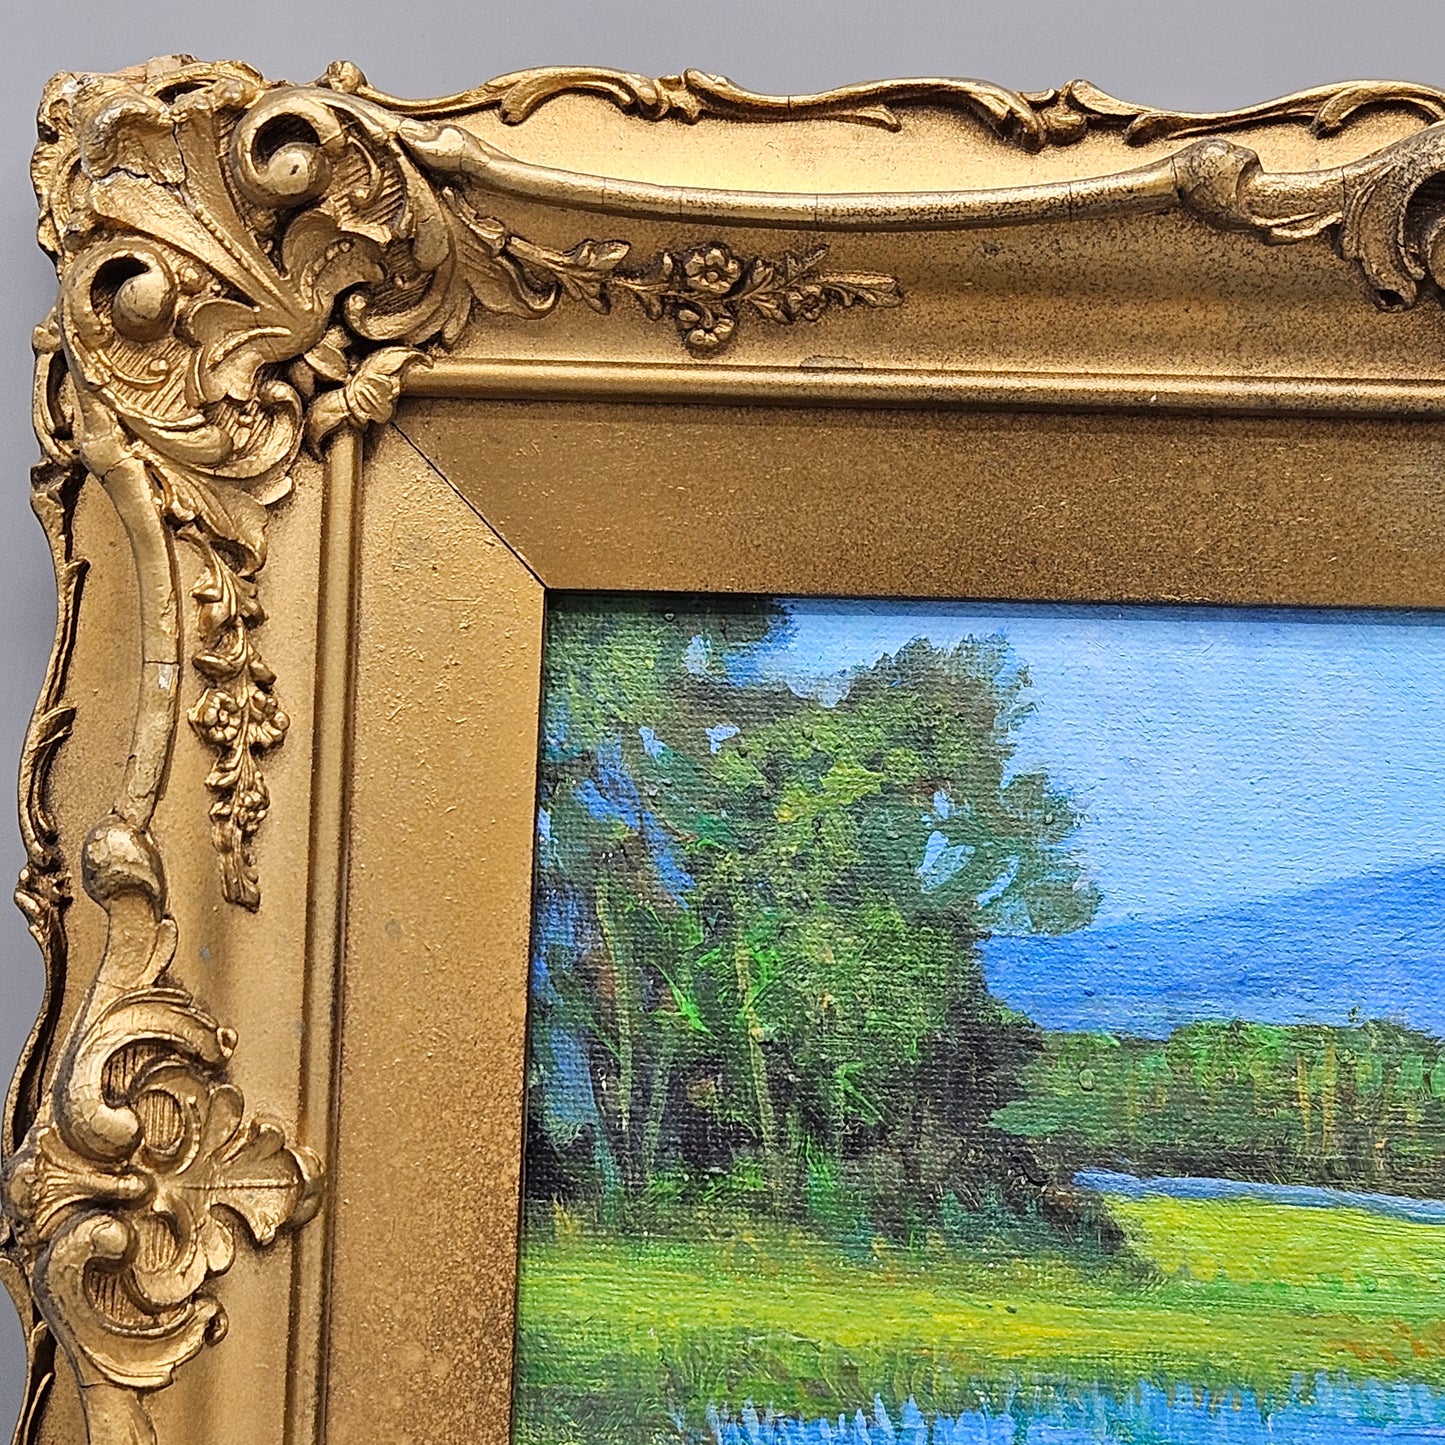 Beautiful Colorful Landscape Painting in Antique Gold Gilt Ornate Frame